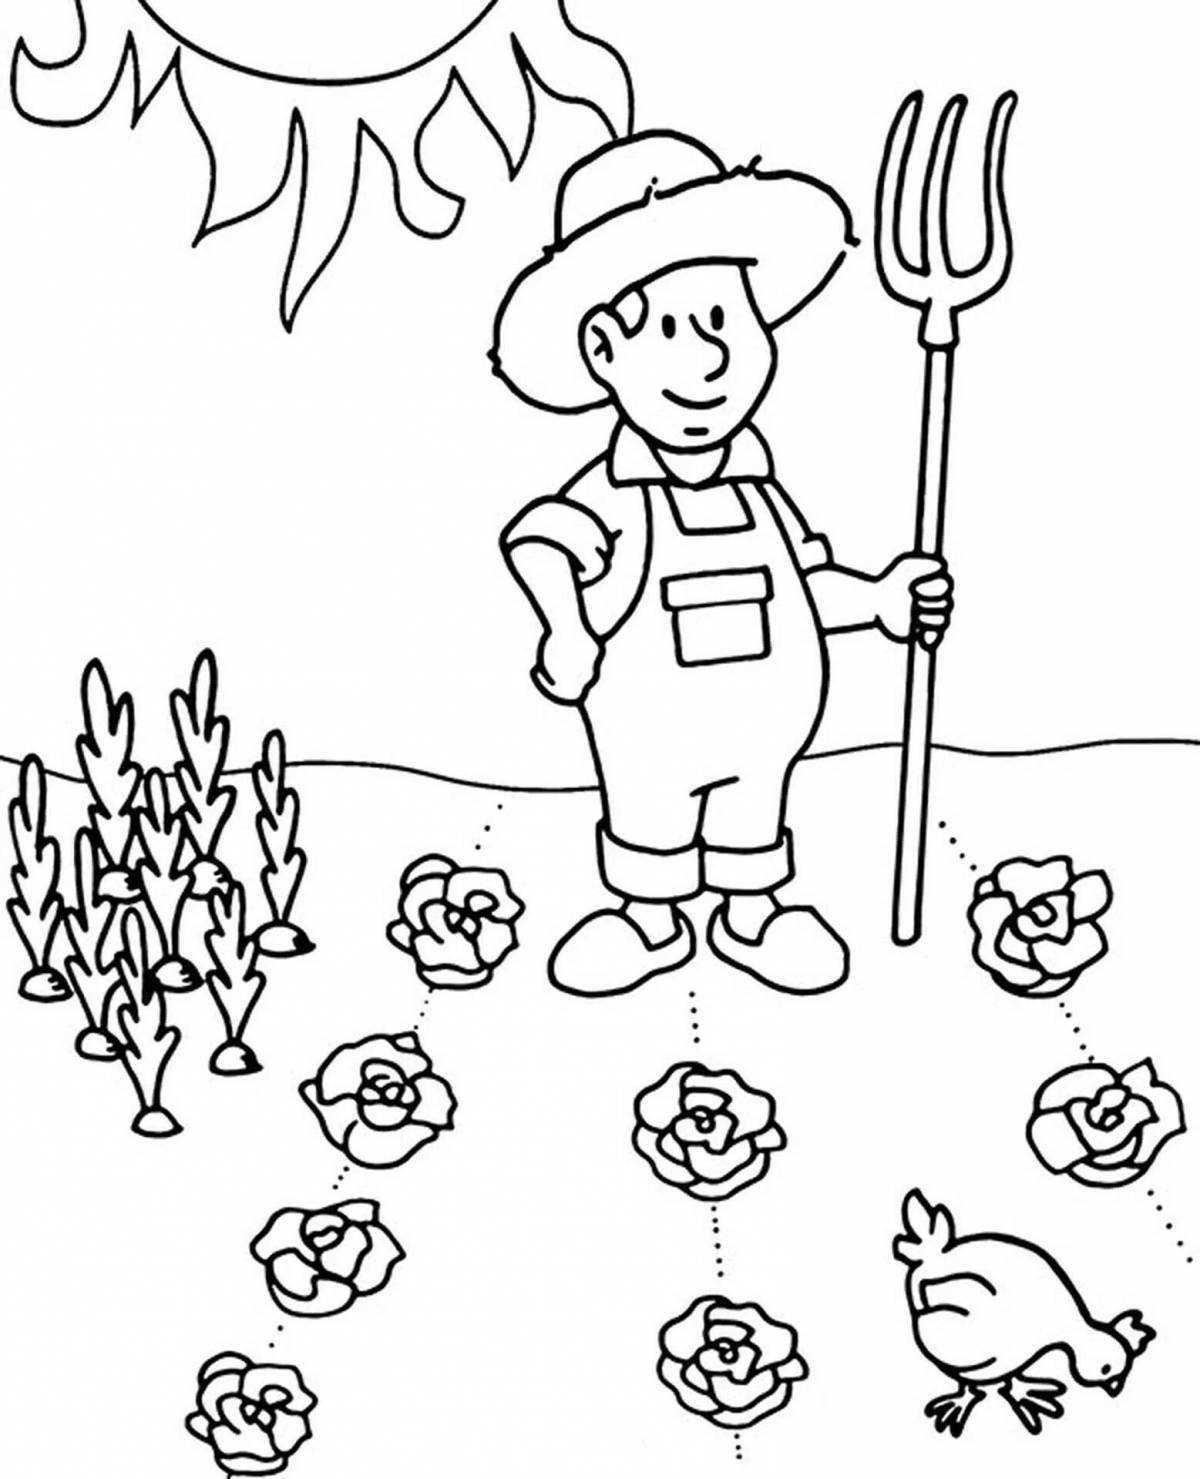 Colorful farmer coloring page for kids